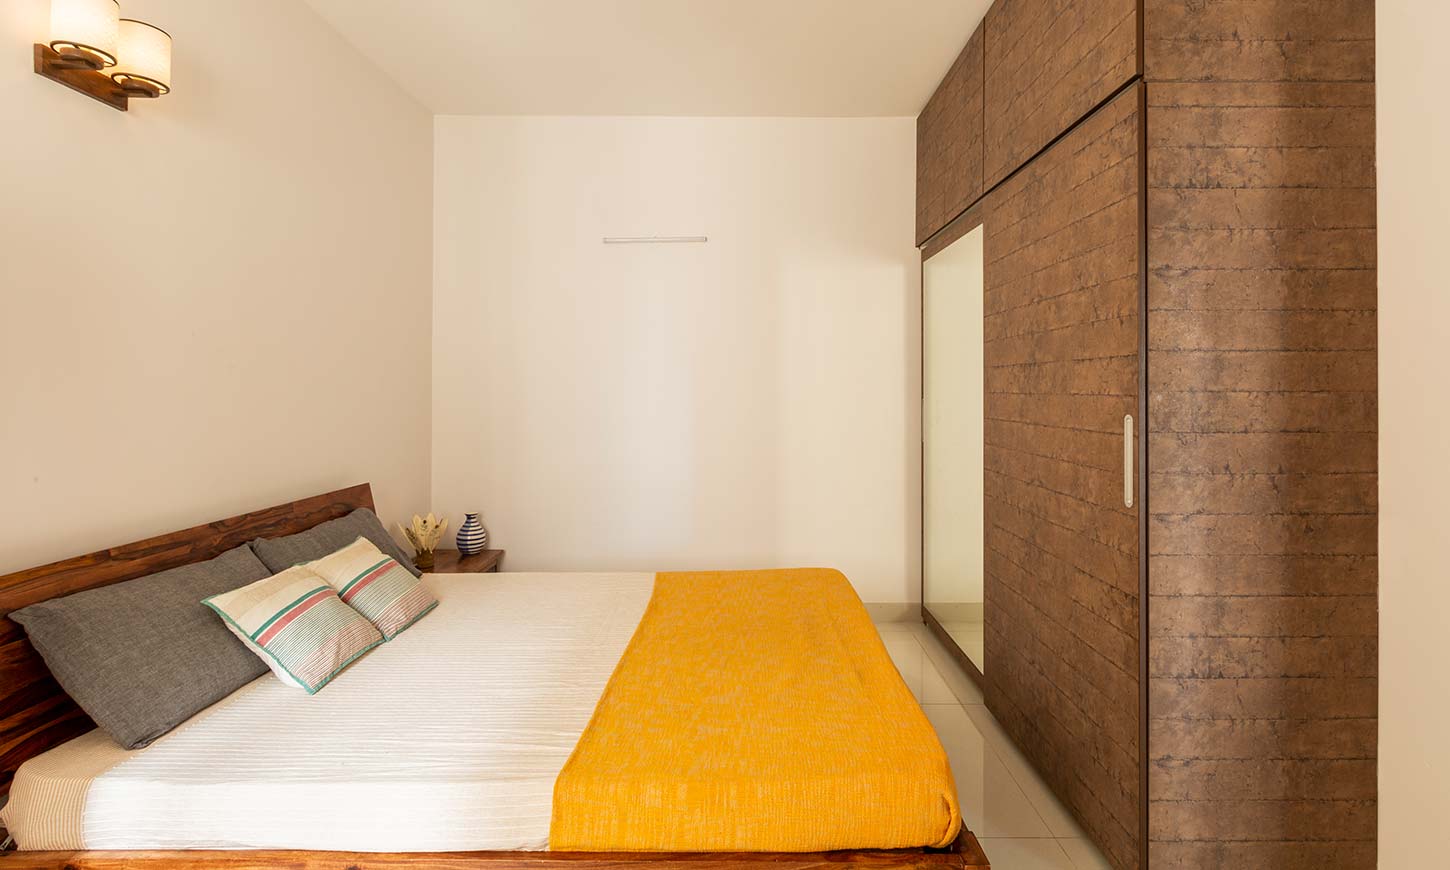 Bedroom interior with wardrobe and loft designed by best interior design firms in bangalore